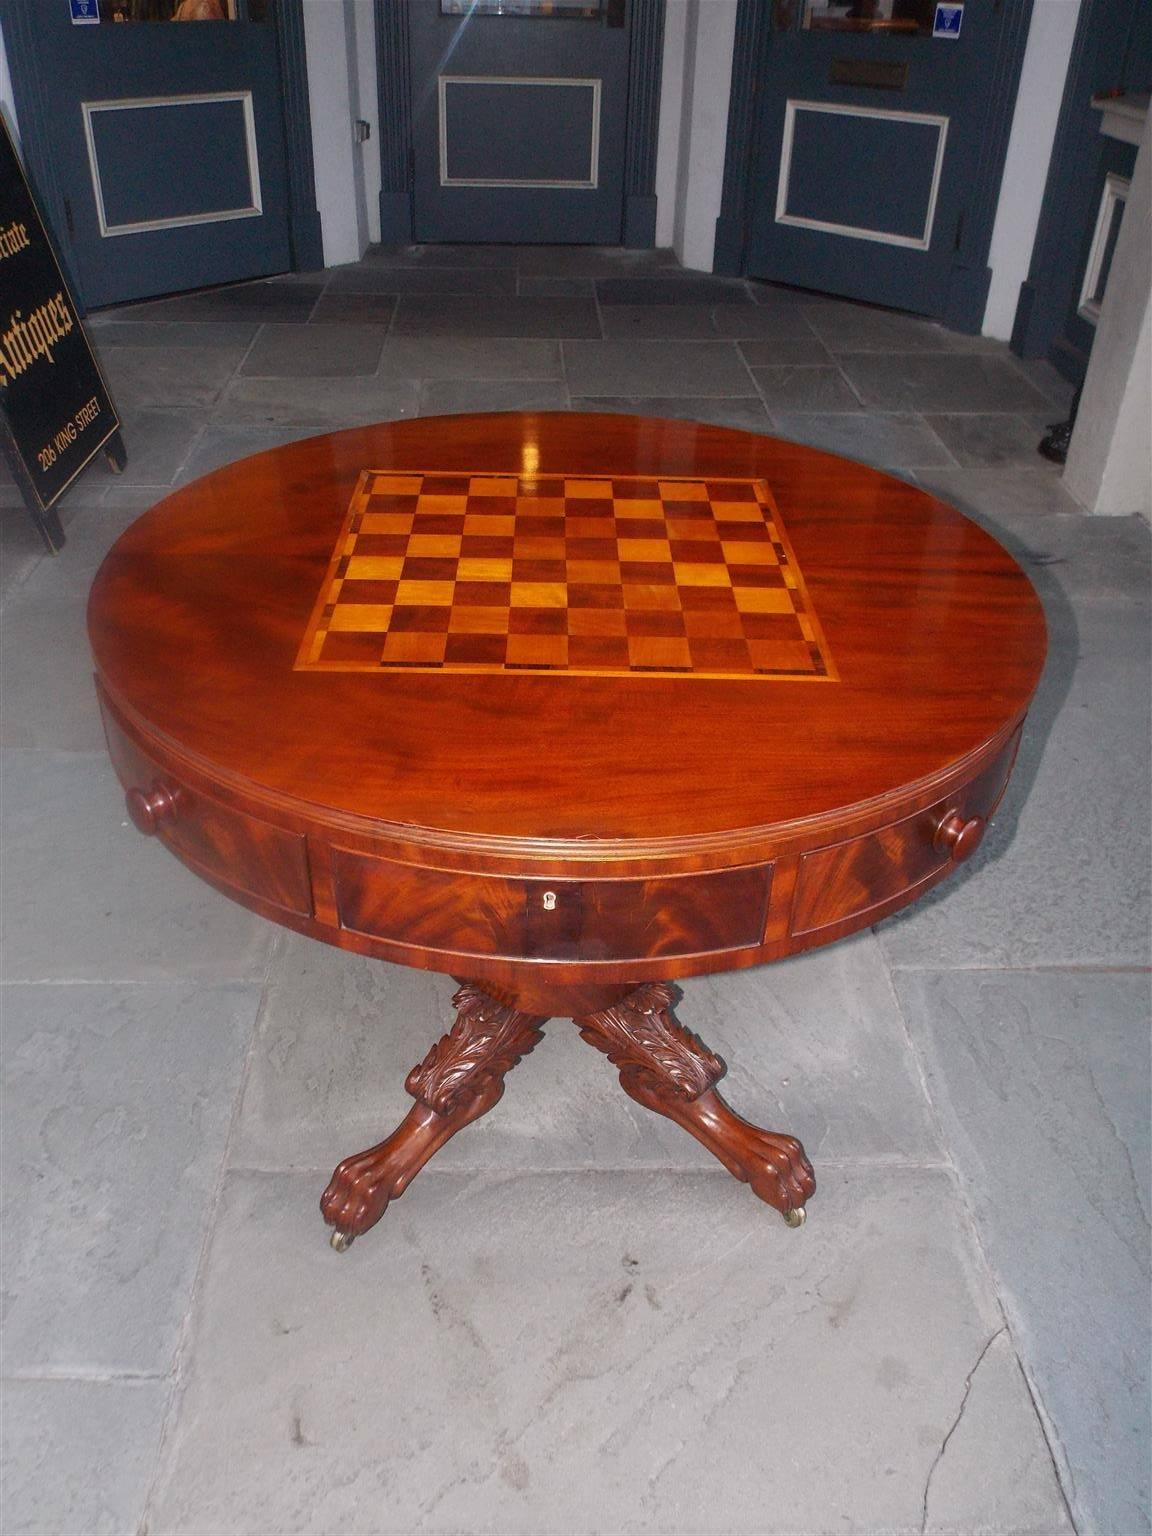 American mahogany circular game table with inlaid chess board, eight drawers with the original wooden knobs, resting on a acanthus carved bulbous pedestal with lions paw feet and original brass casters, Philadelphia, Early 19th Century.